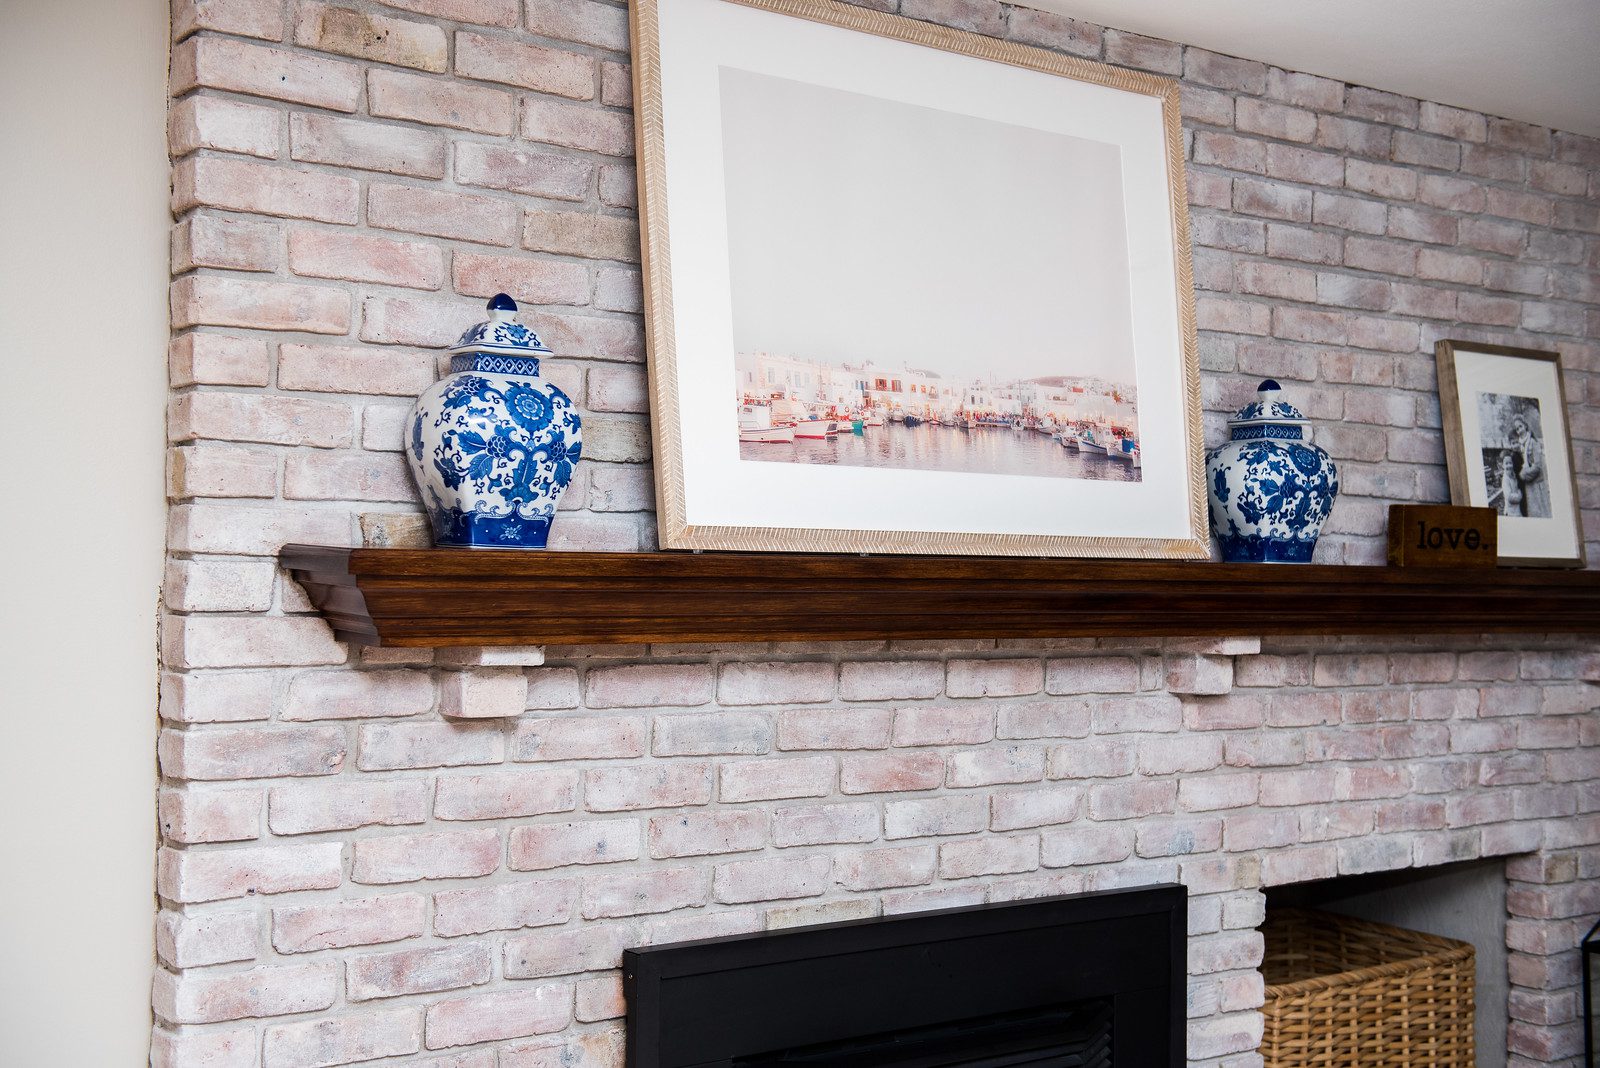 A fireplace with two vases on the mantle.